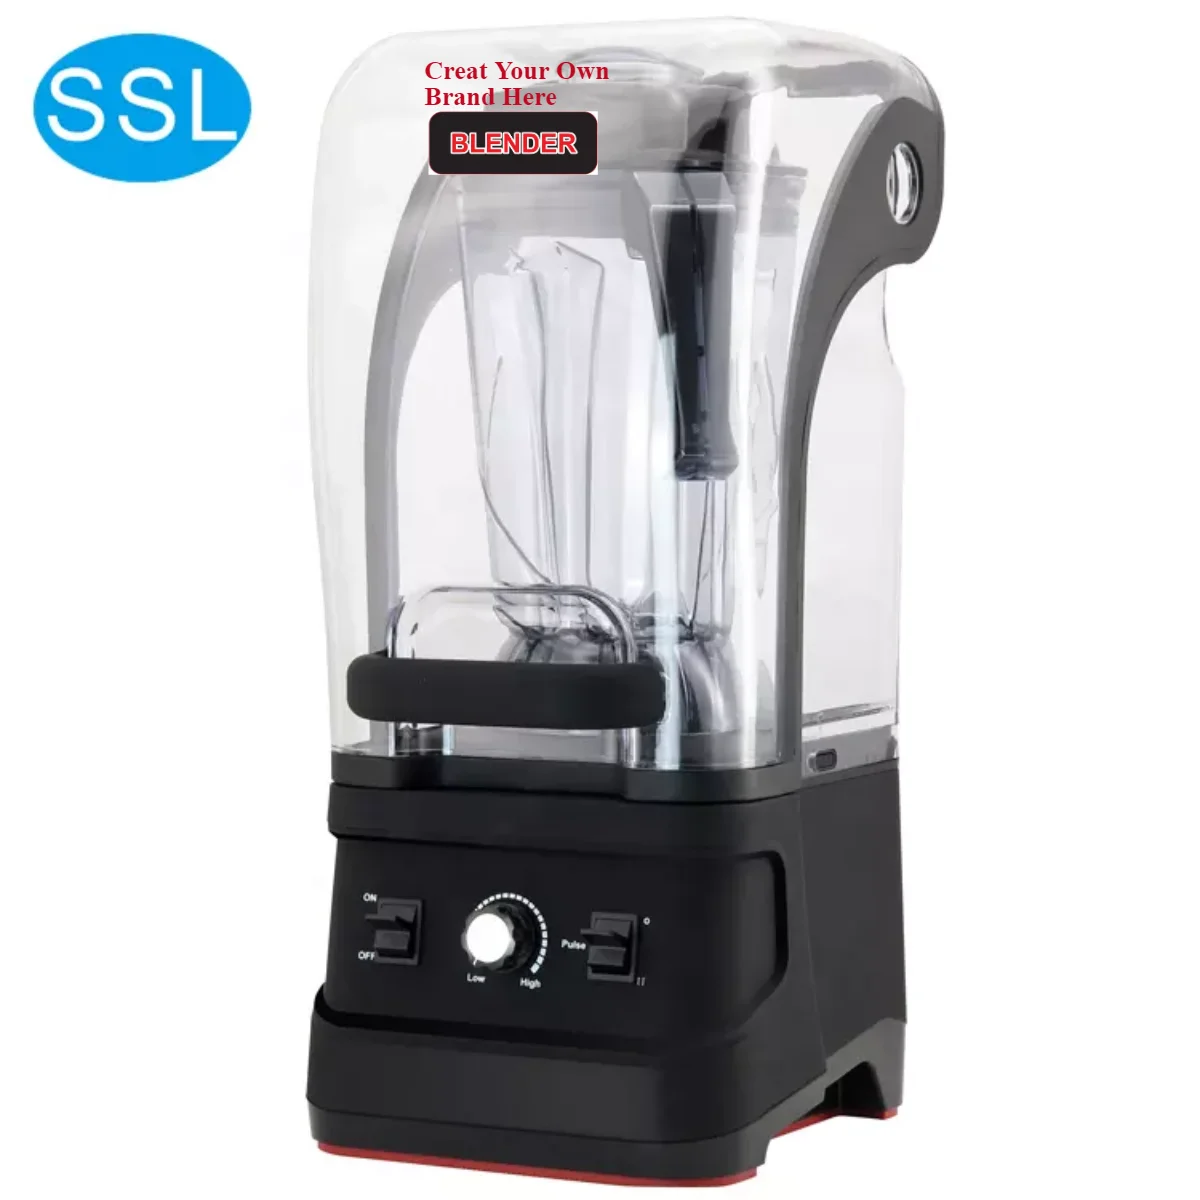 https://ae01.alicdn.com/kf/S2e745ef9732a463b9aab8b542245c7f5W/Professional-Low-Noise-Strong-Horsepower-Commercial-Blender-Mixer-Juicer-2-5L-Food-Processor-Smoothies-Fruit-Ice.jpg